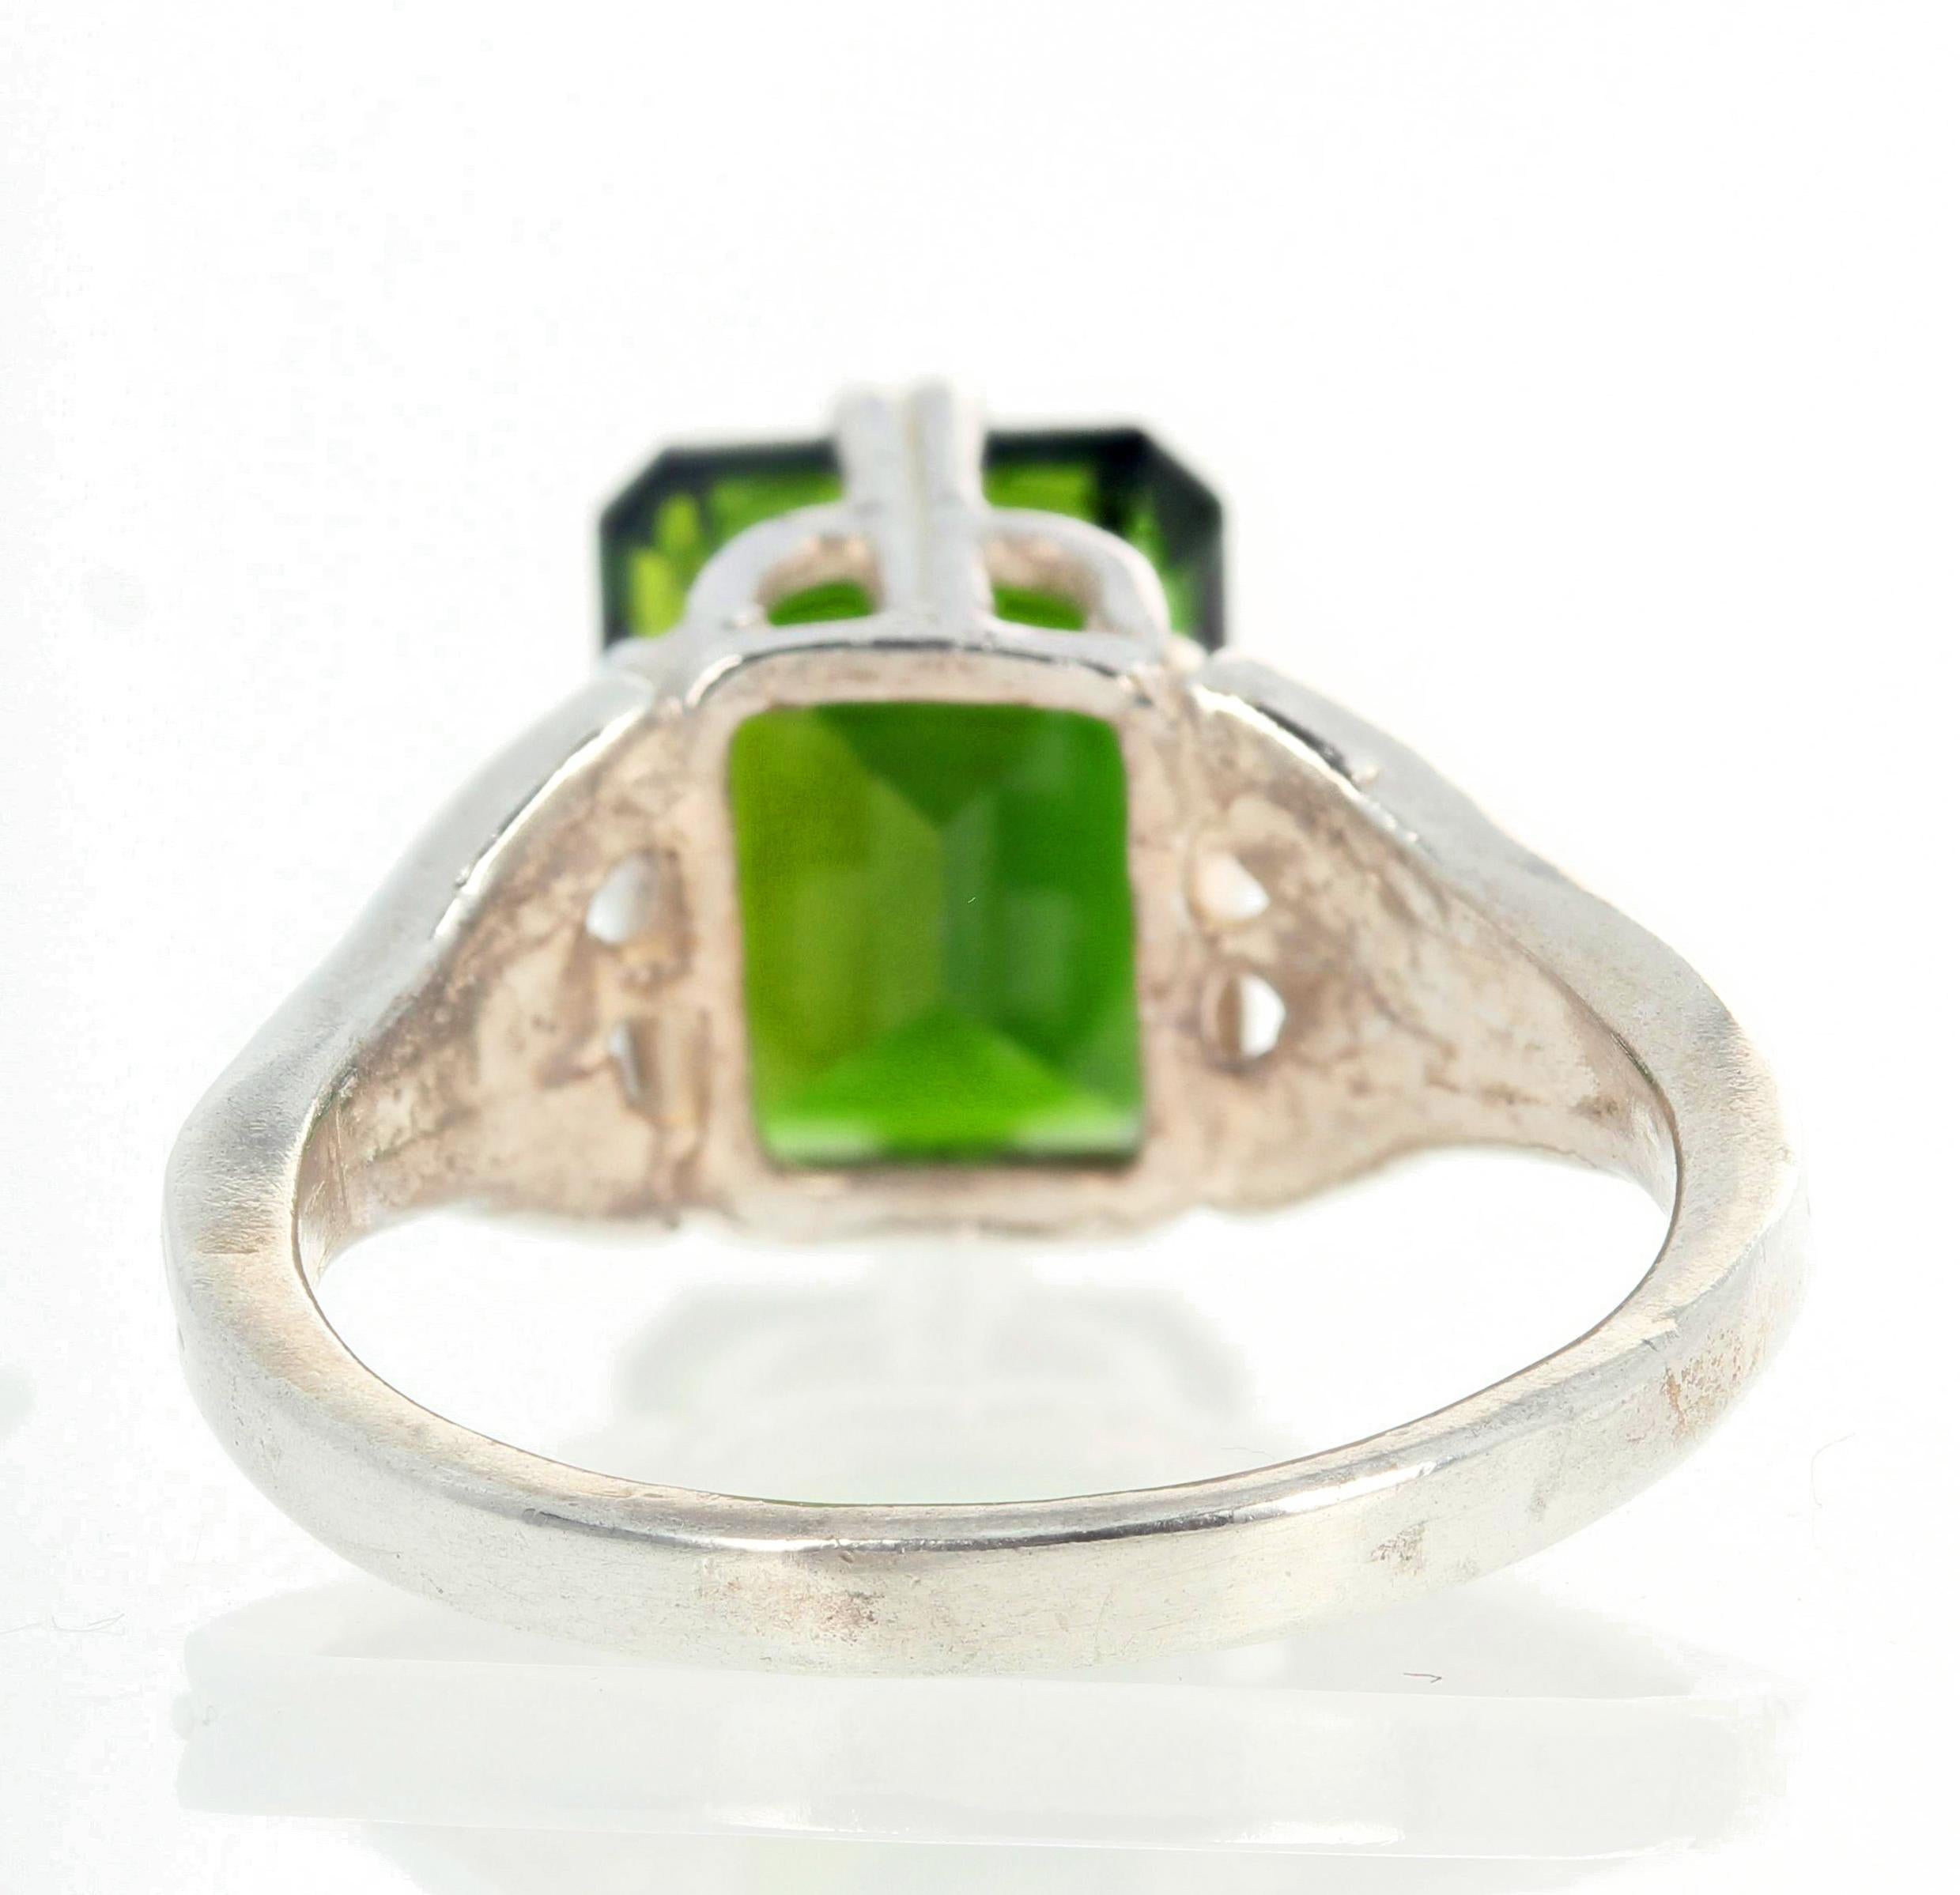 AJD Glowing Deep Green 2.8 Carat Chrome Diopside Sterling Silver Ring In New Condition For Sale In Raleigh, NC